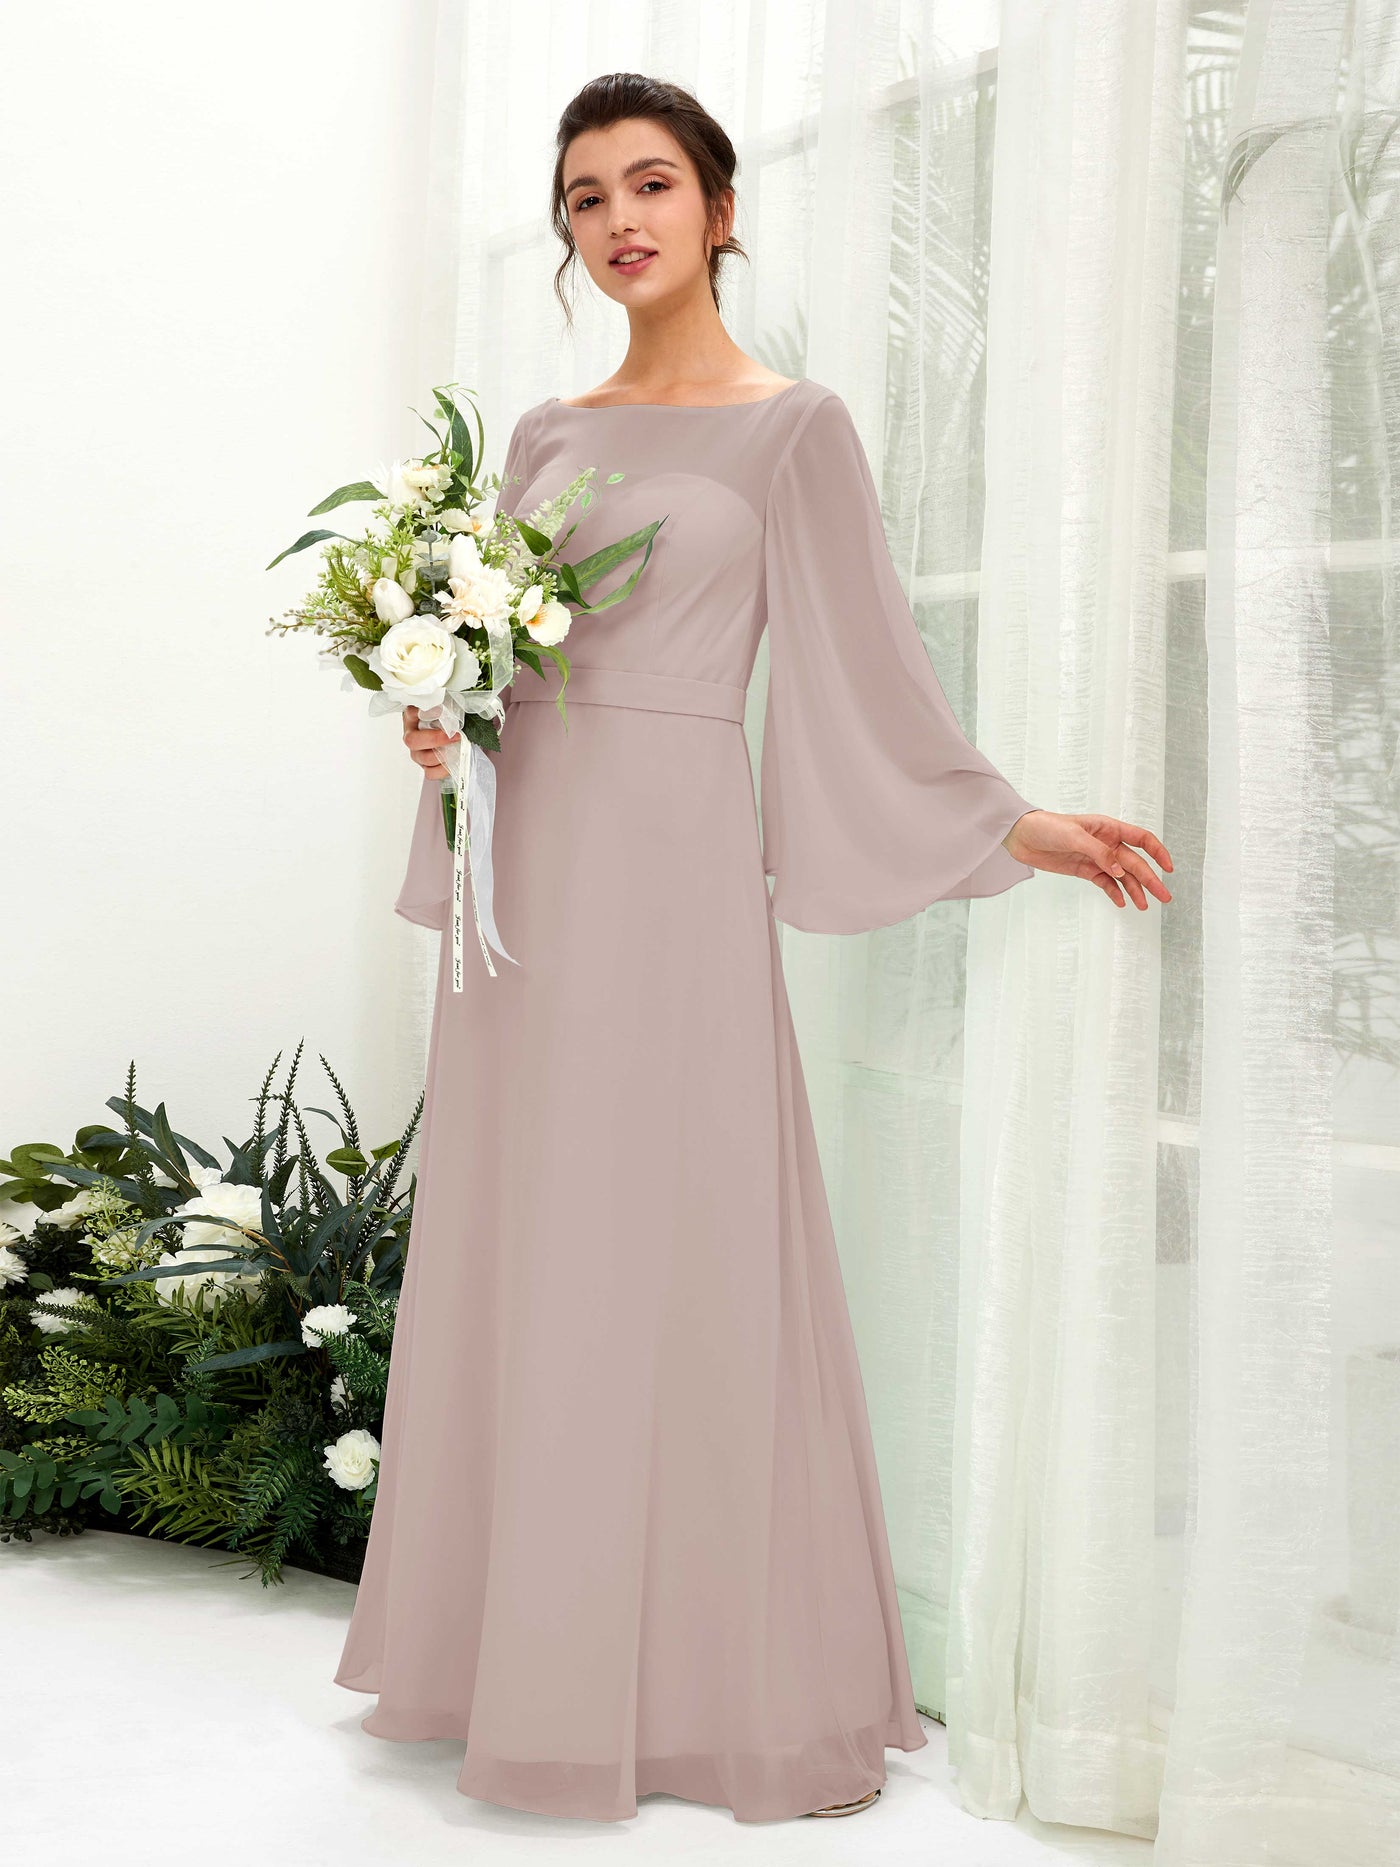 Taupe Bridesmaid Dresses Bridesmaid Dress A-line Chiffon Bateau Full Length Long Sleeves Wedding Party Dress (81220524)#color_taupe